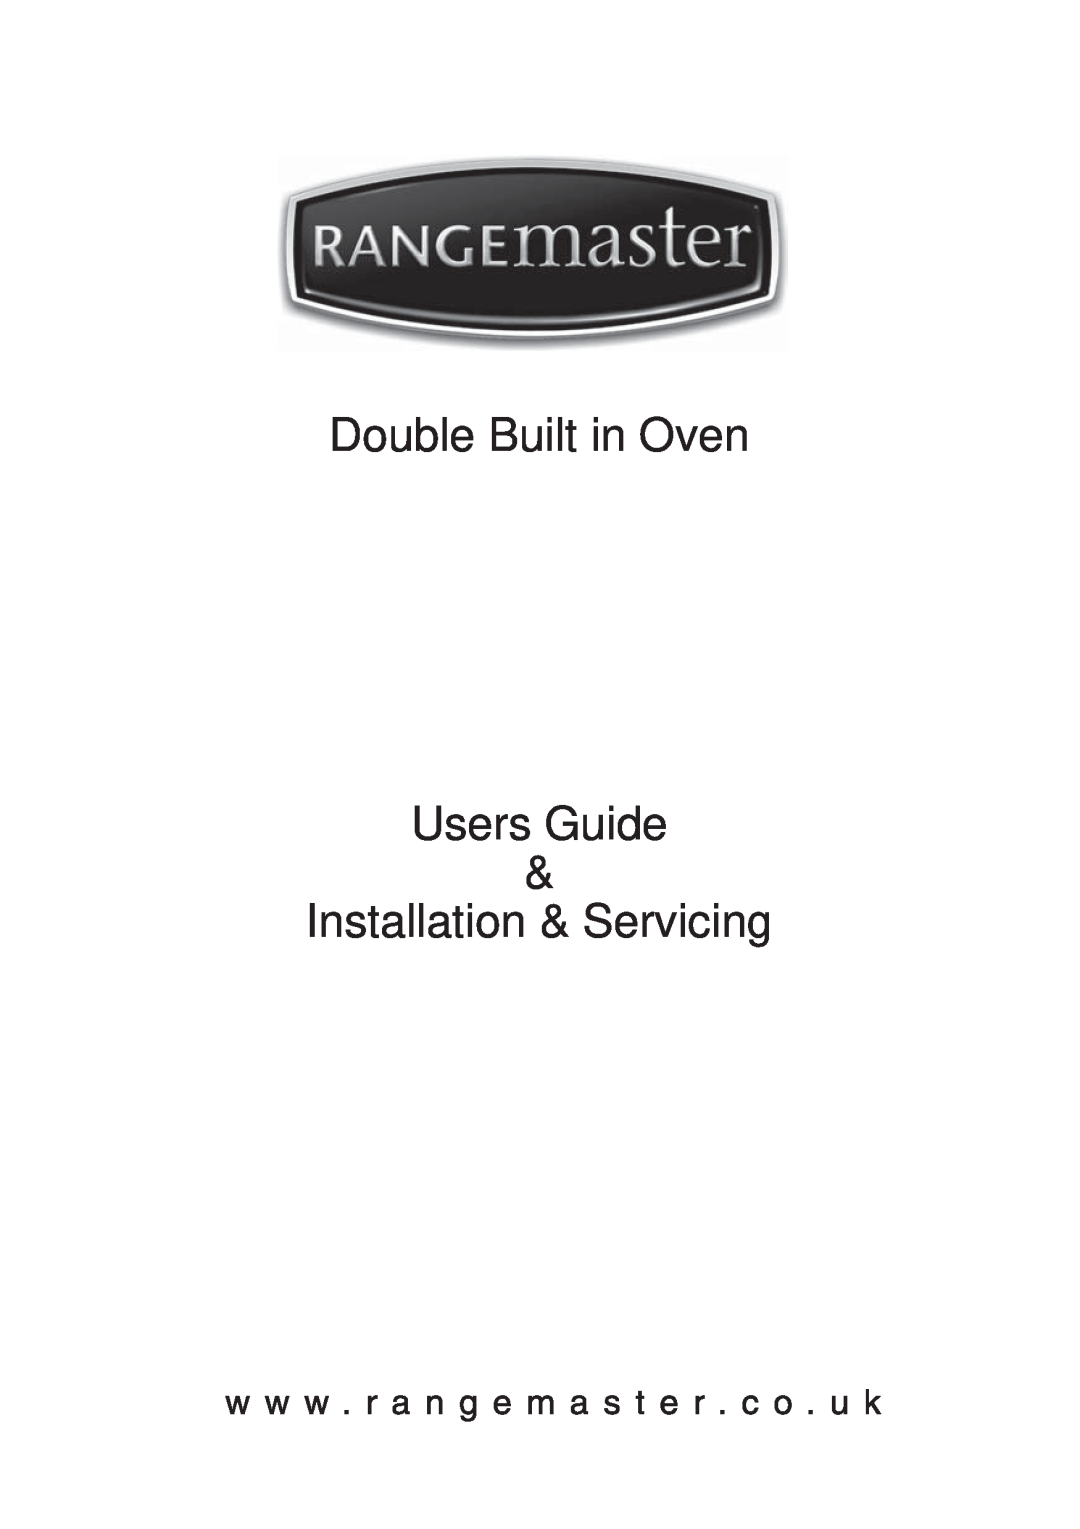 Rangemaster manual Double Built in Oven Users Guide, Installation & Servicing 